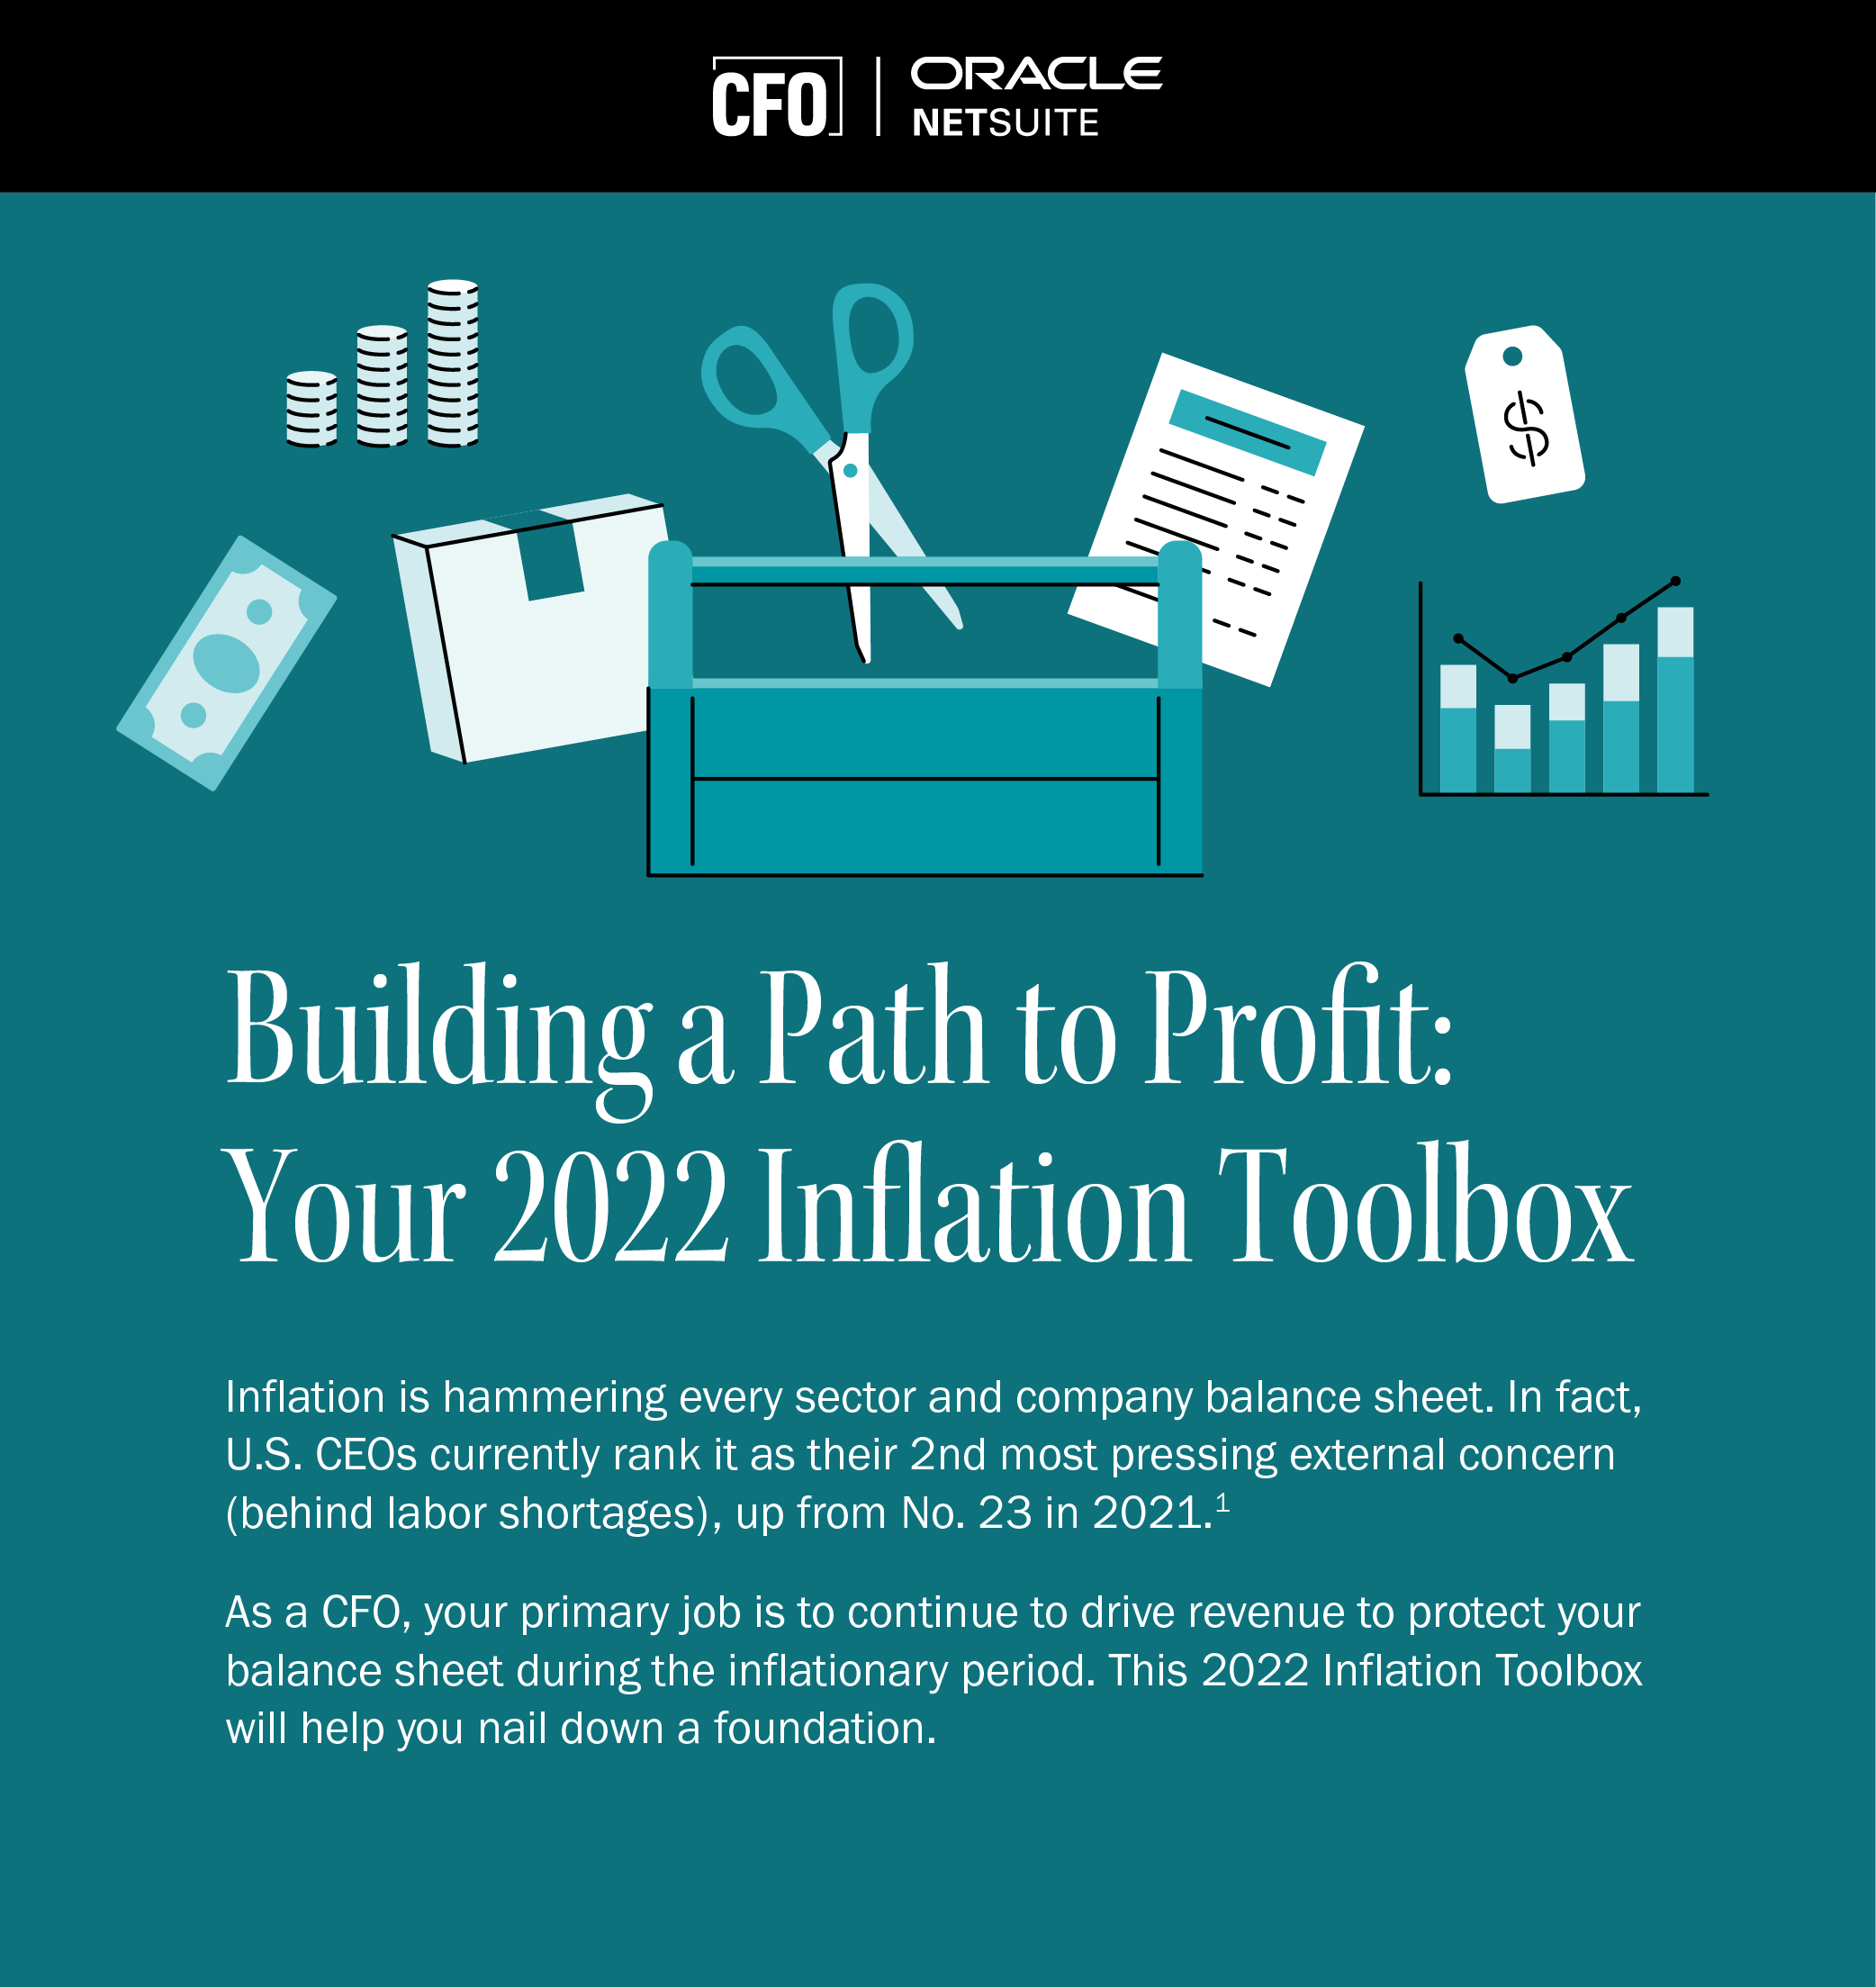 CFO_Building a Path to Profit_infographic_02.11.22-landing page_landing page.png